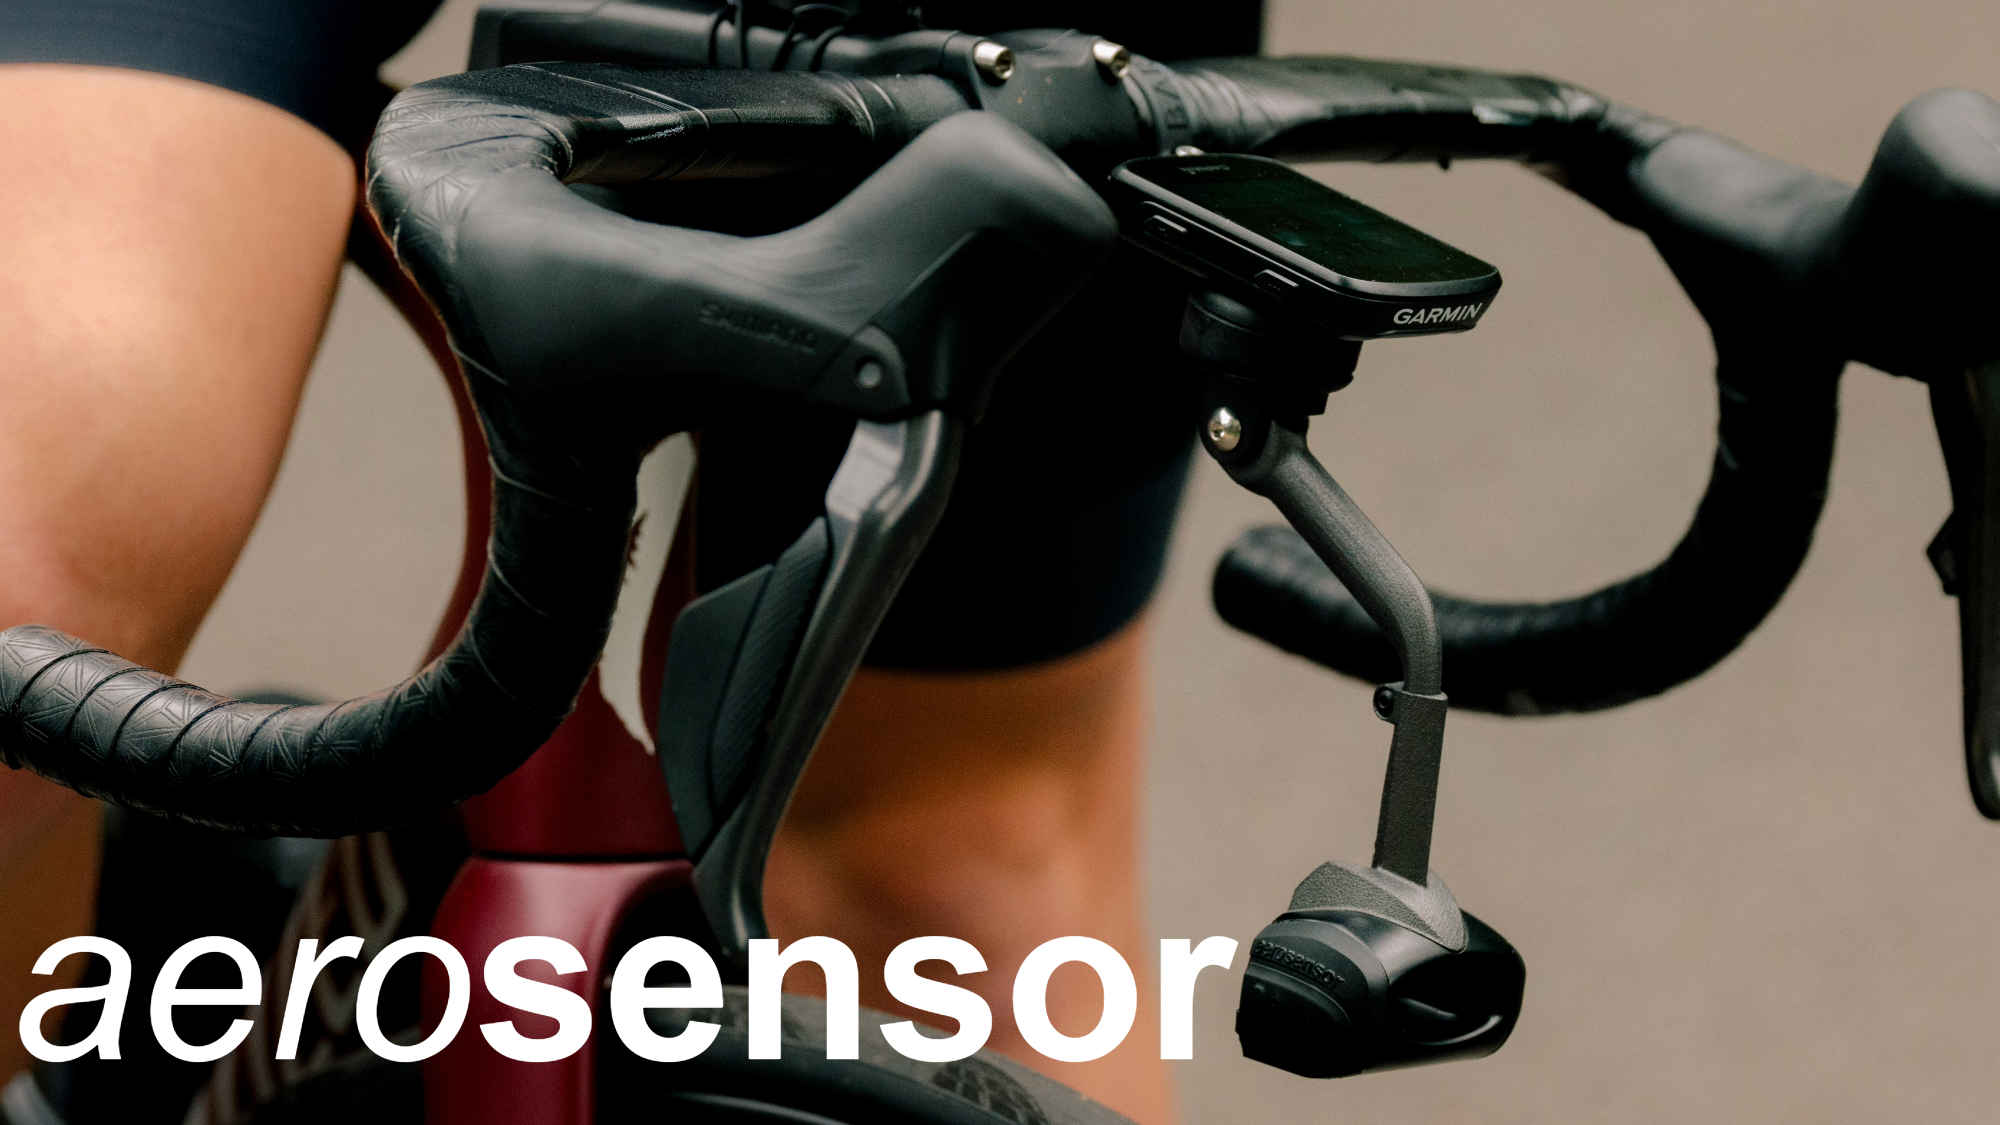 aerosensor cycling device promotional video cover photo